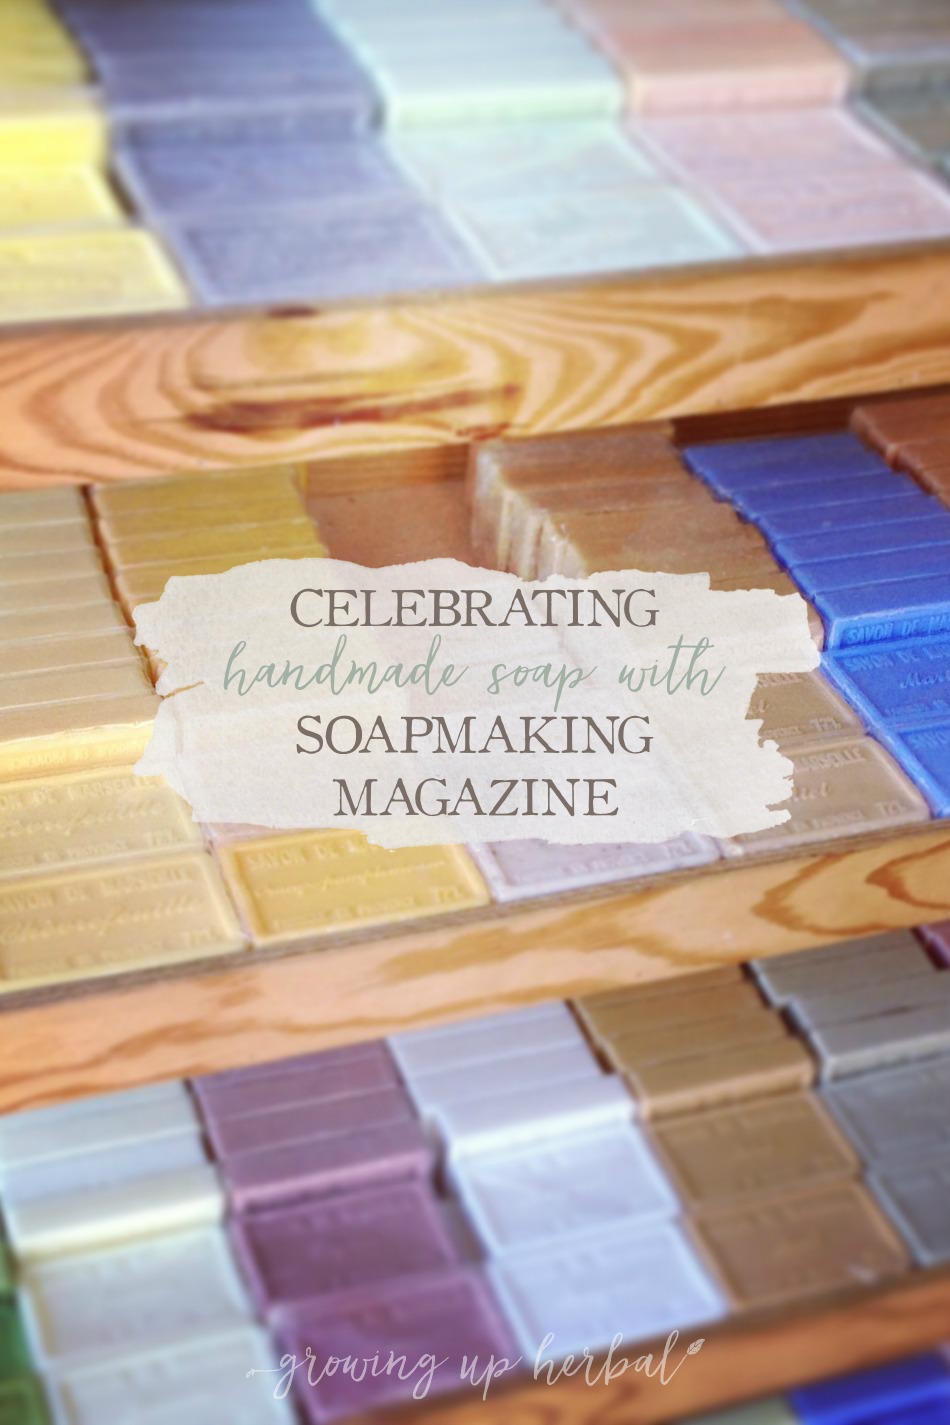 Celebrating Handmade Soap With Making Soap Magazine | Growing Up Herbal | Do you love handmade soap? This magazine is probably for you then!